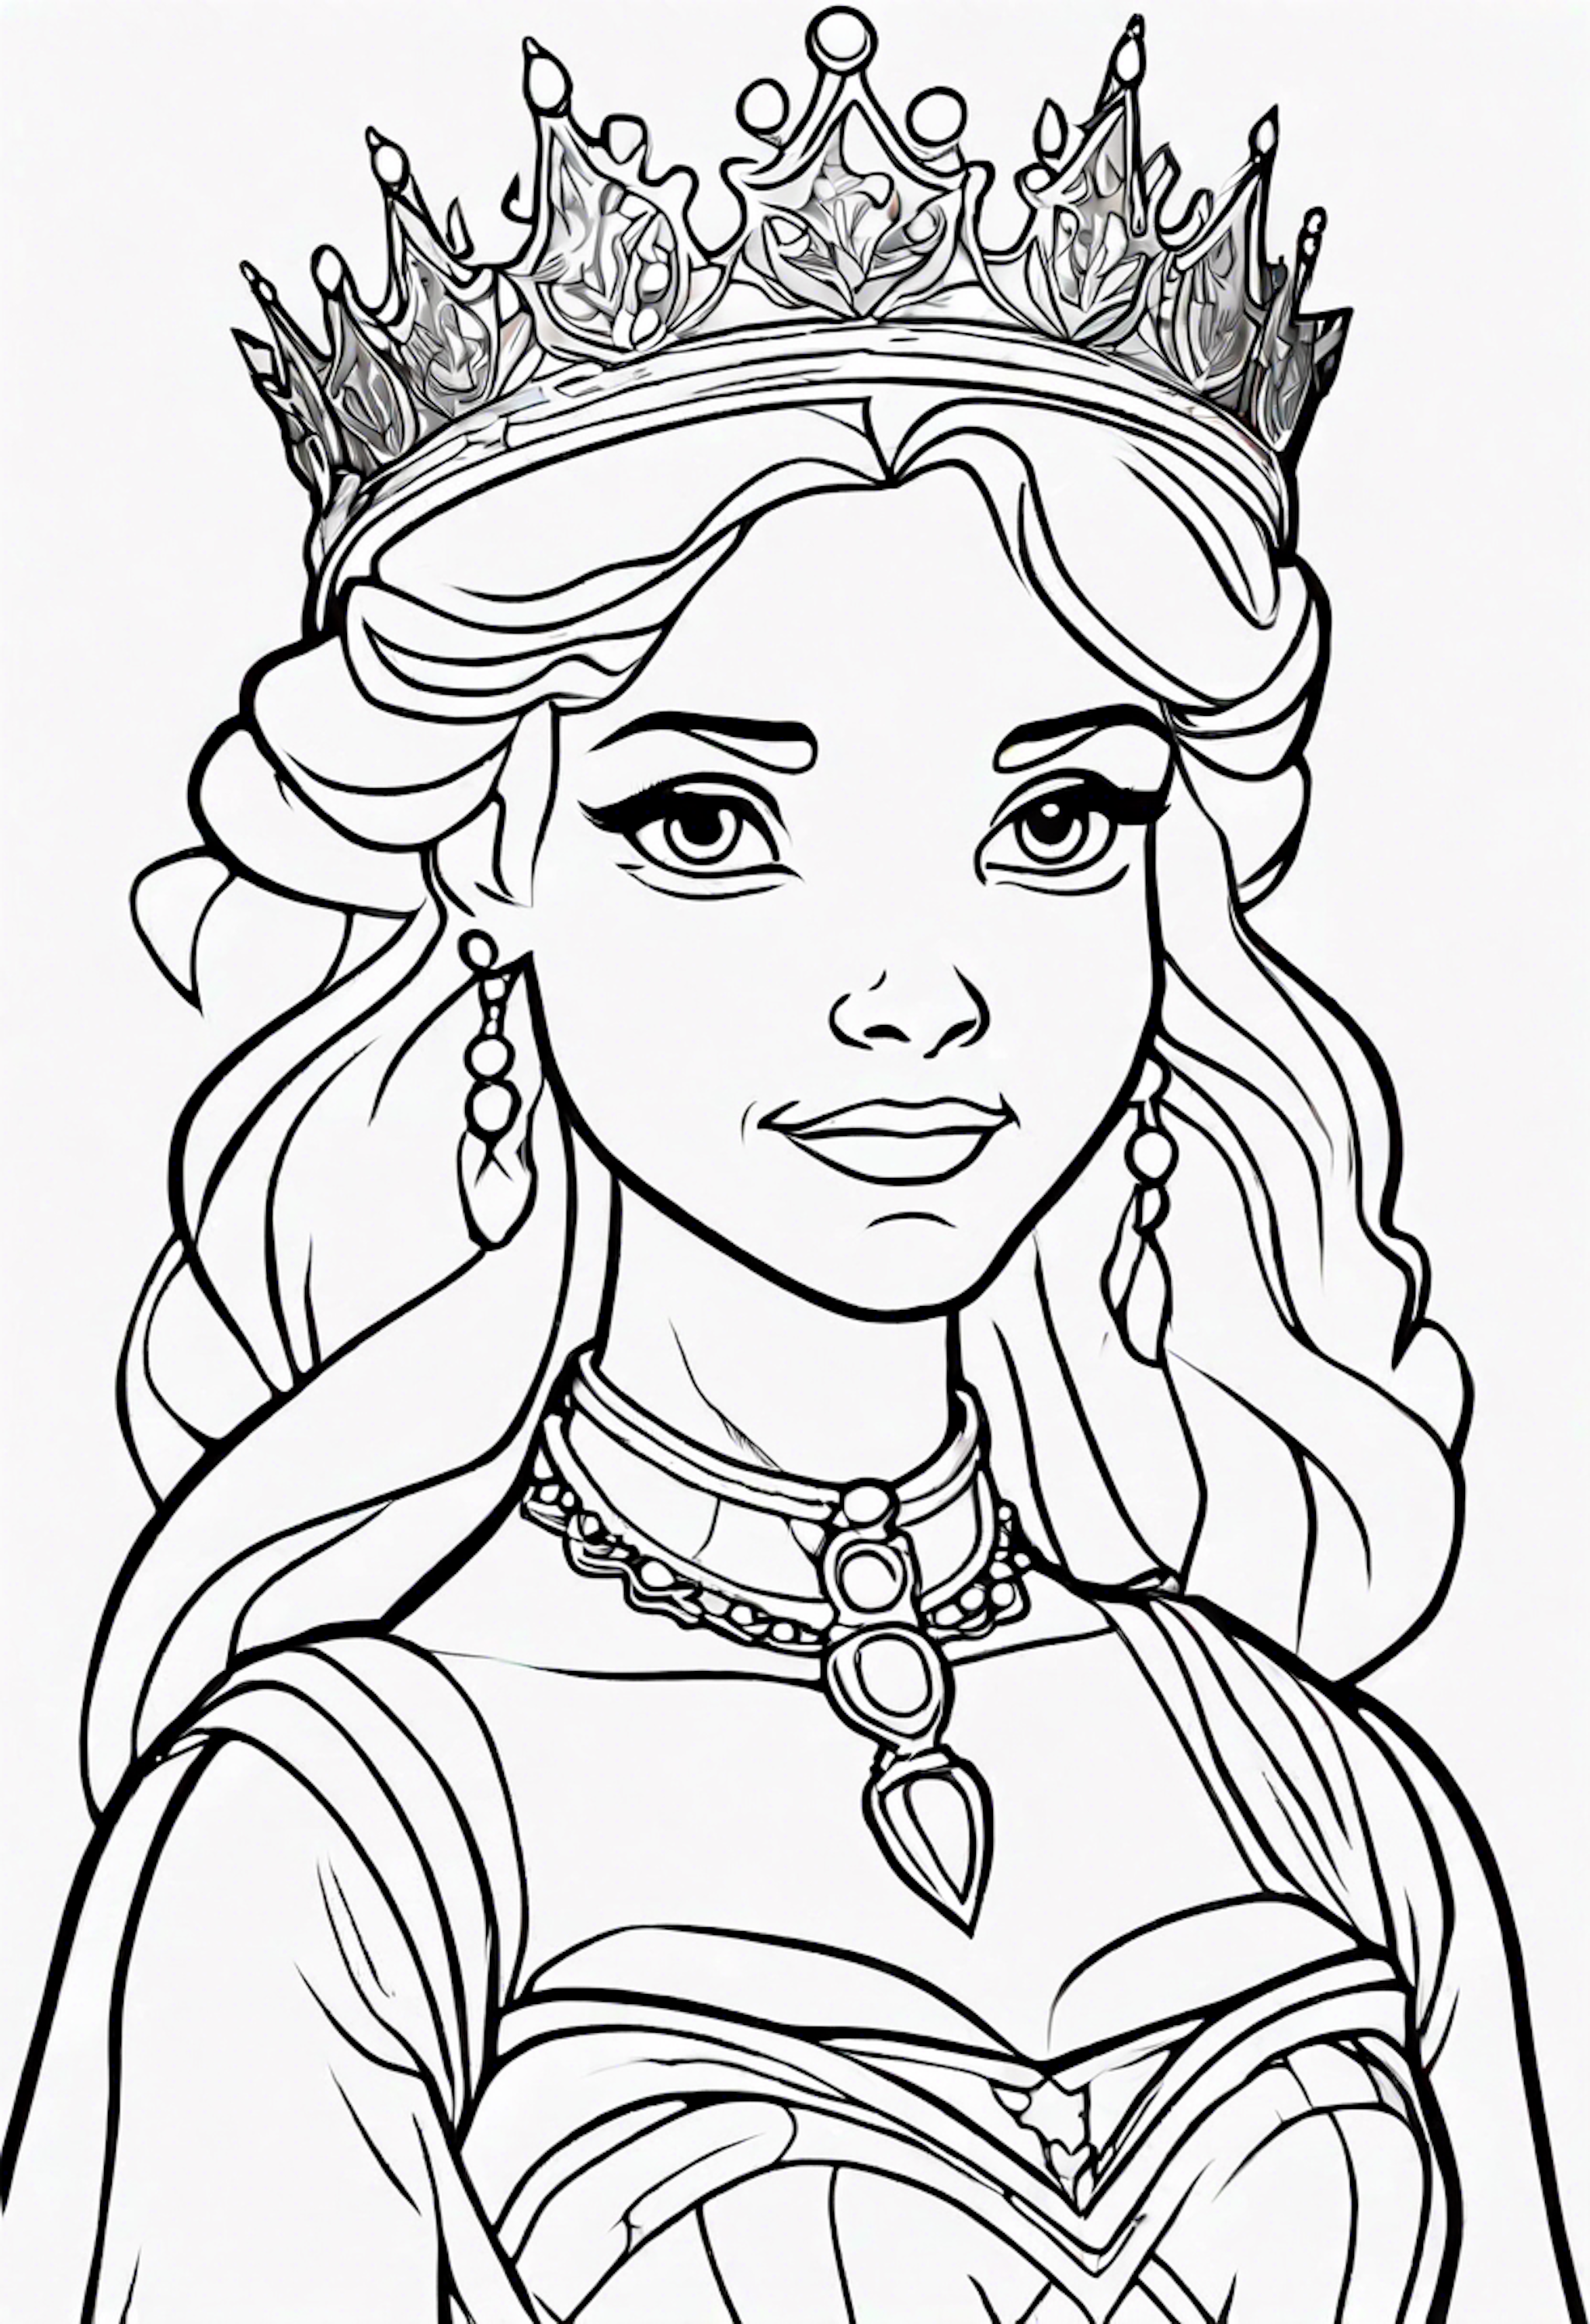 A coloring page for 1 Princess coloring pages